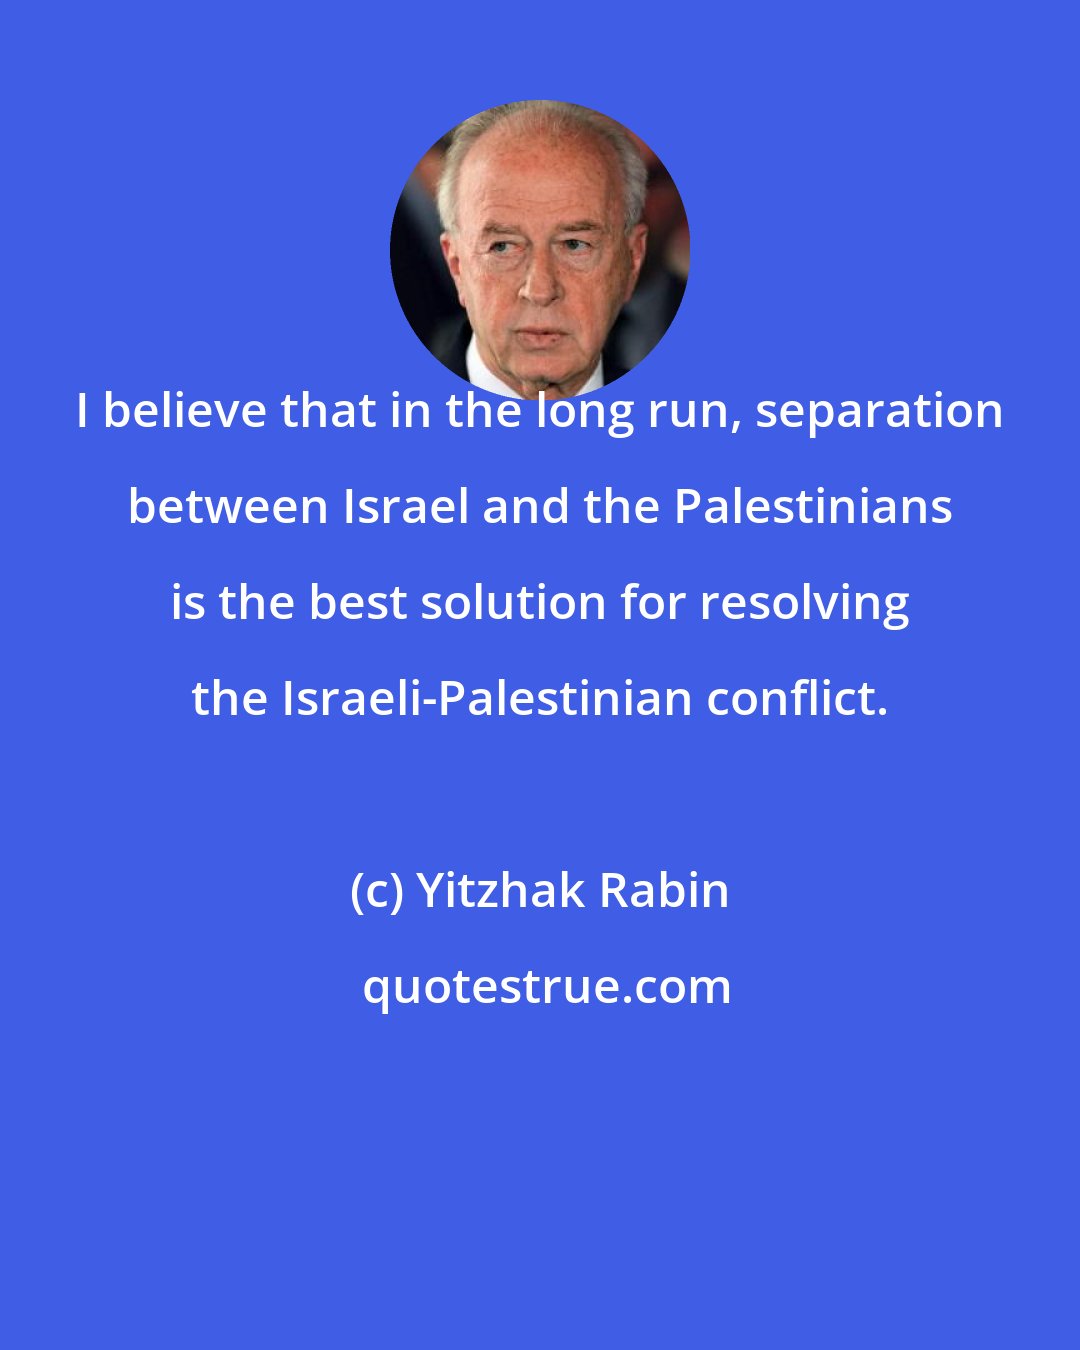 Yitzhak Rabin: I believe that in the long run, separation between Israel and the Palestinians is the best solution for resolving the Israeli-Palestinian conflict.